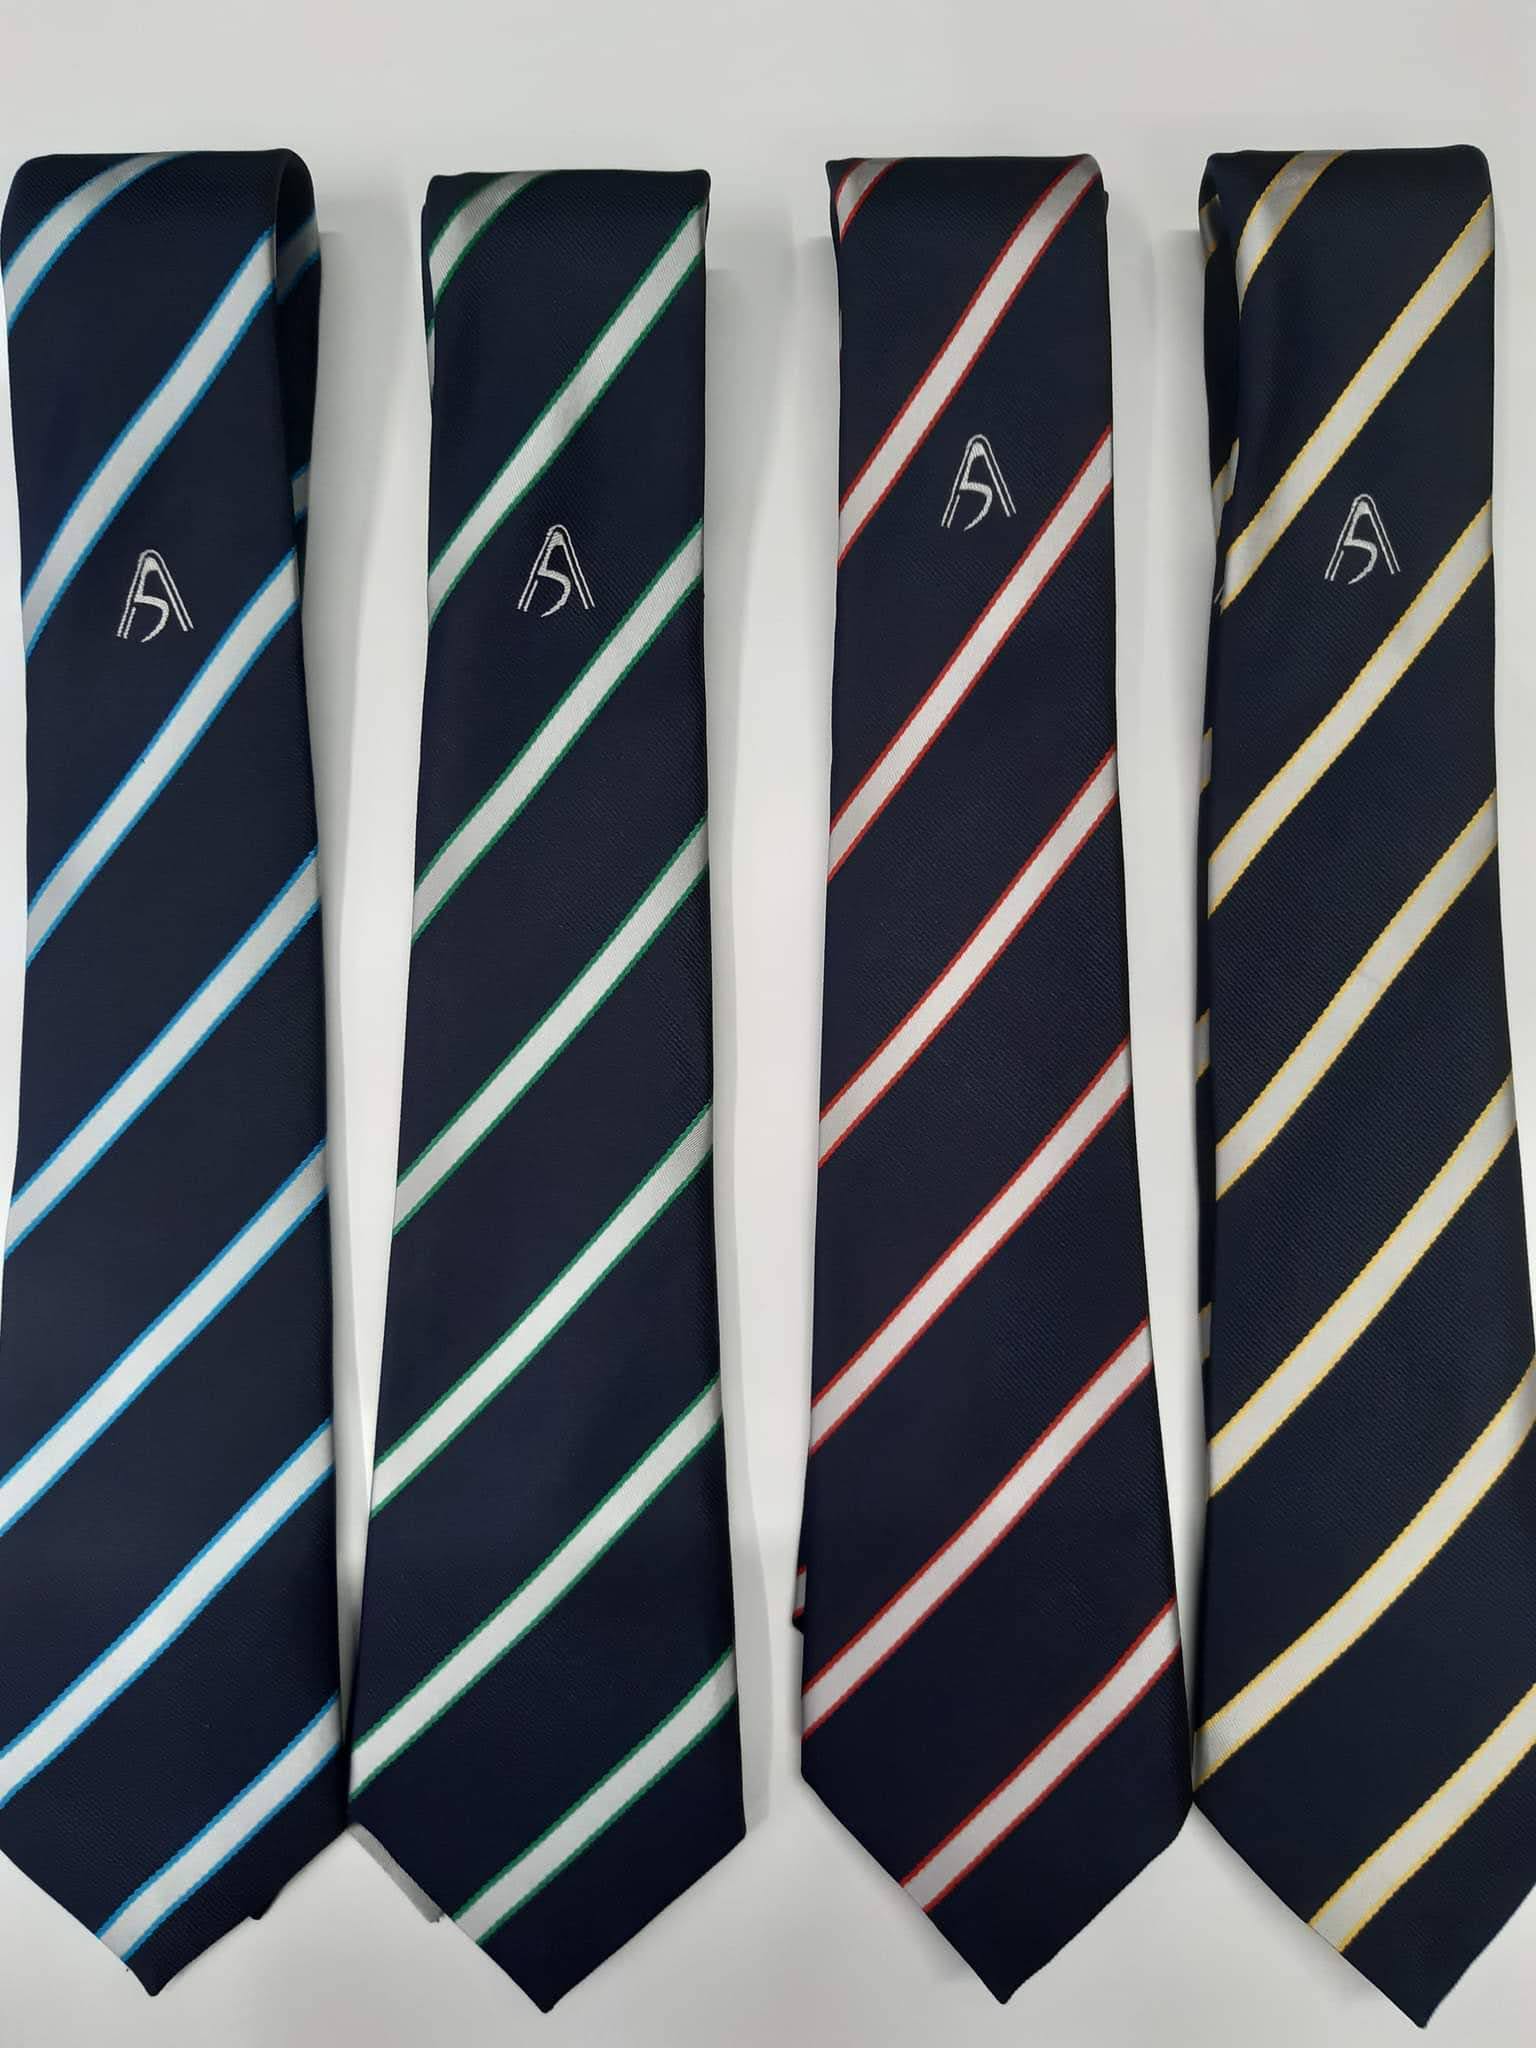 The Abbey School : NEW! Abbey School House Colour Tie..Year 7, 8 & 9 Only!